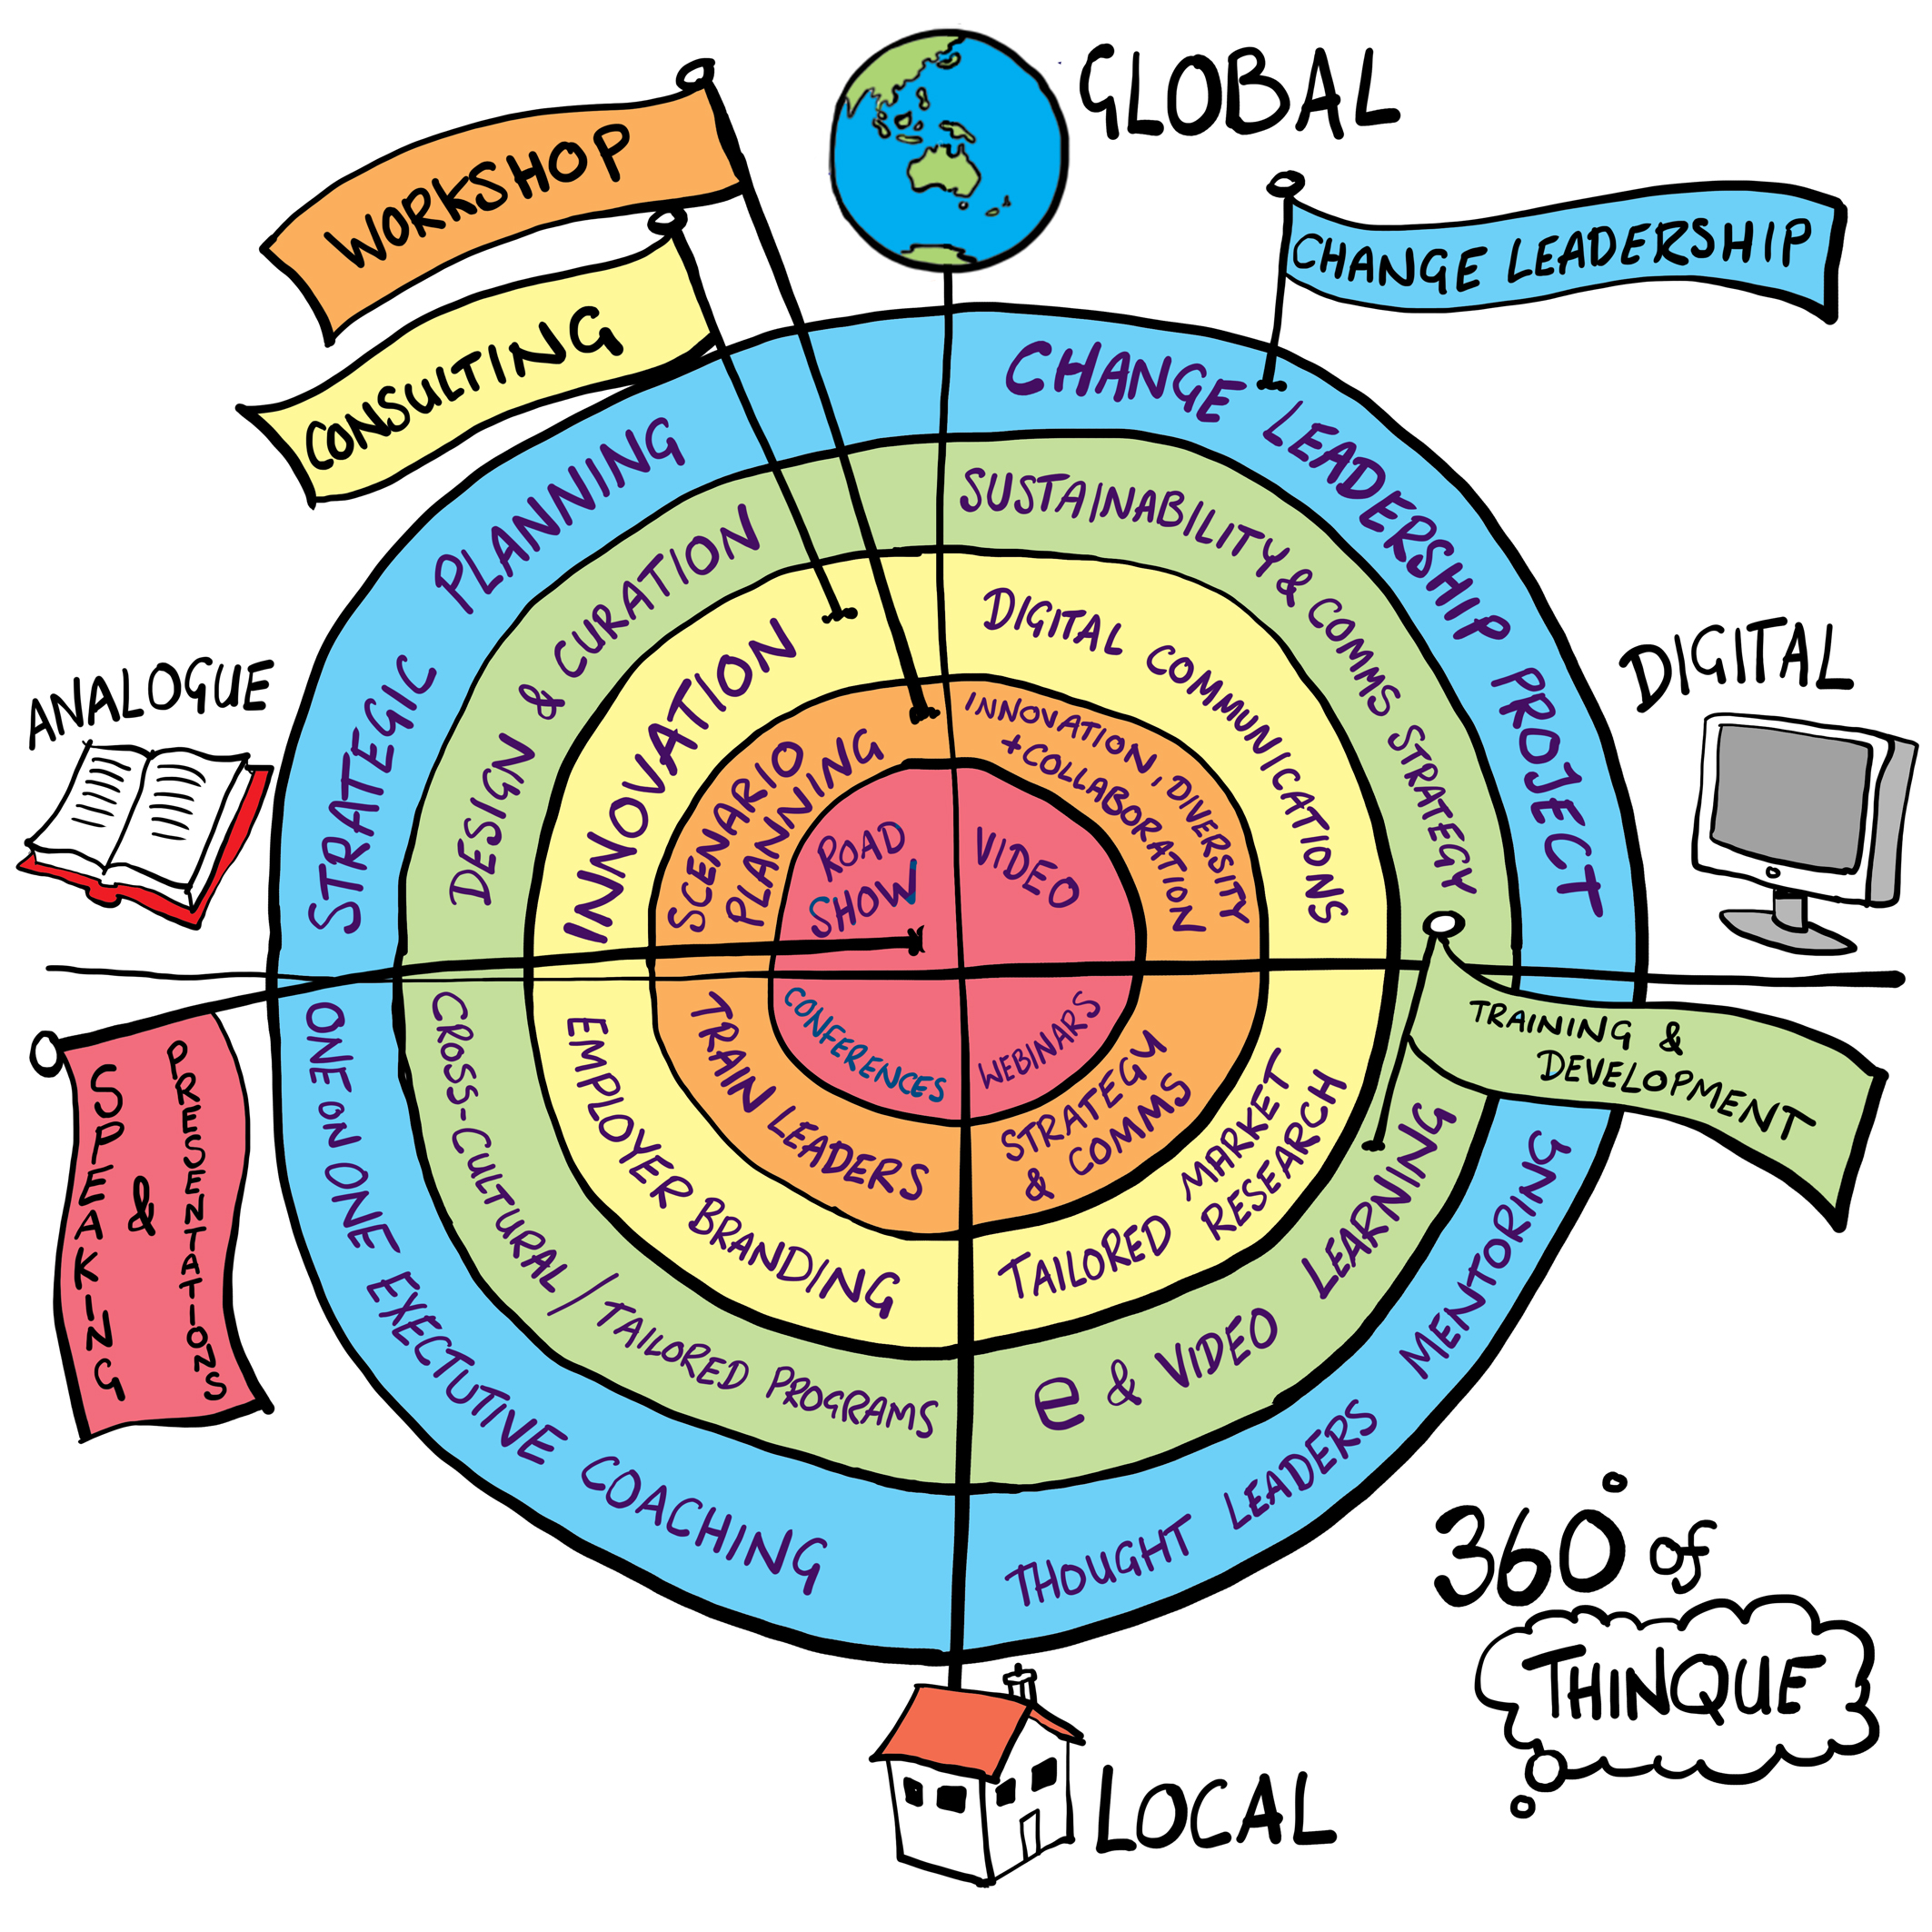 Think Global / Act Local & Communicate Digitally / Connect Analogue: A 360 Degree View of Thinque's Solutions